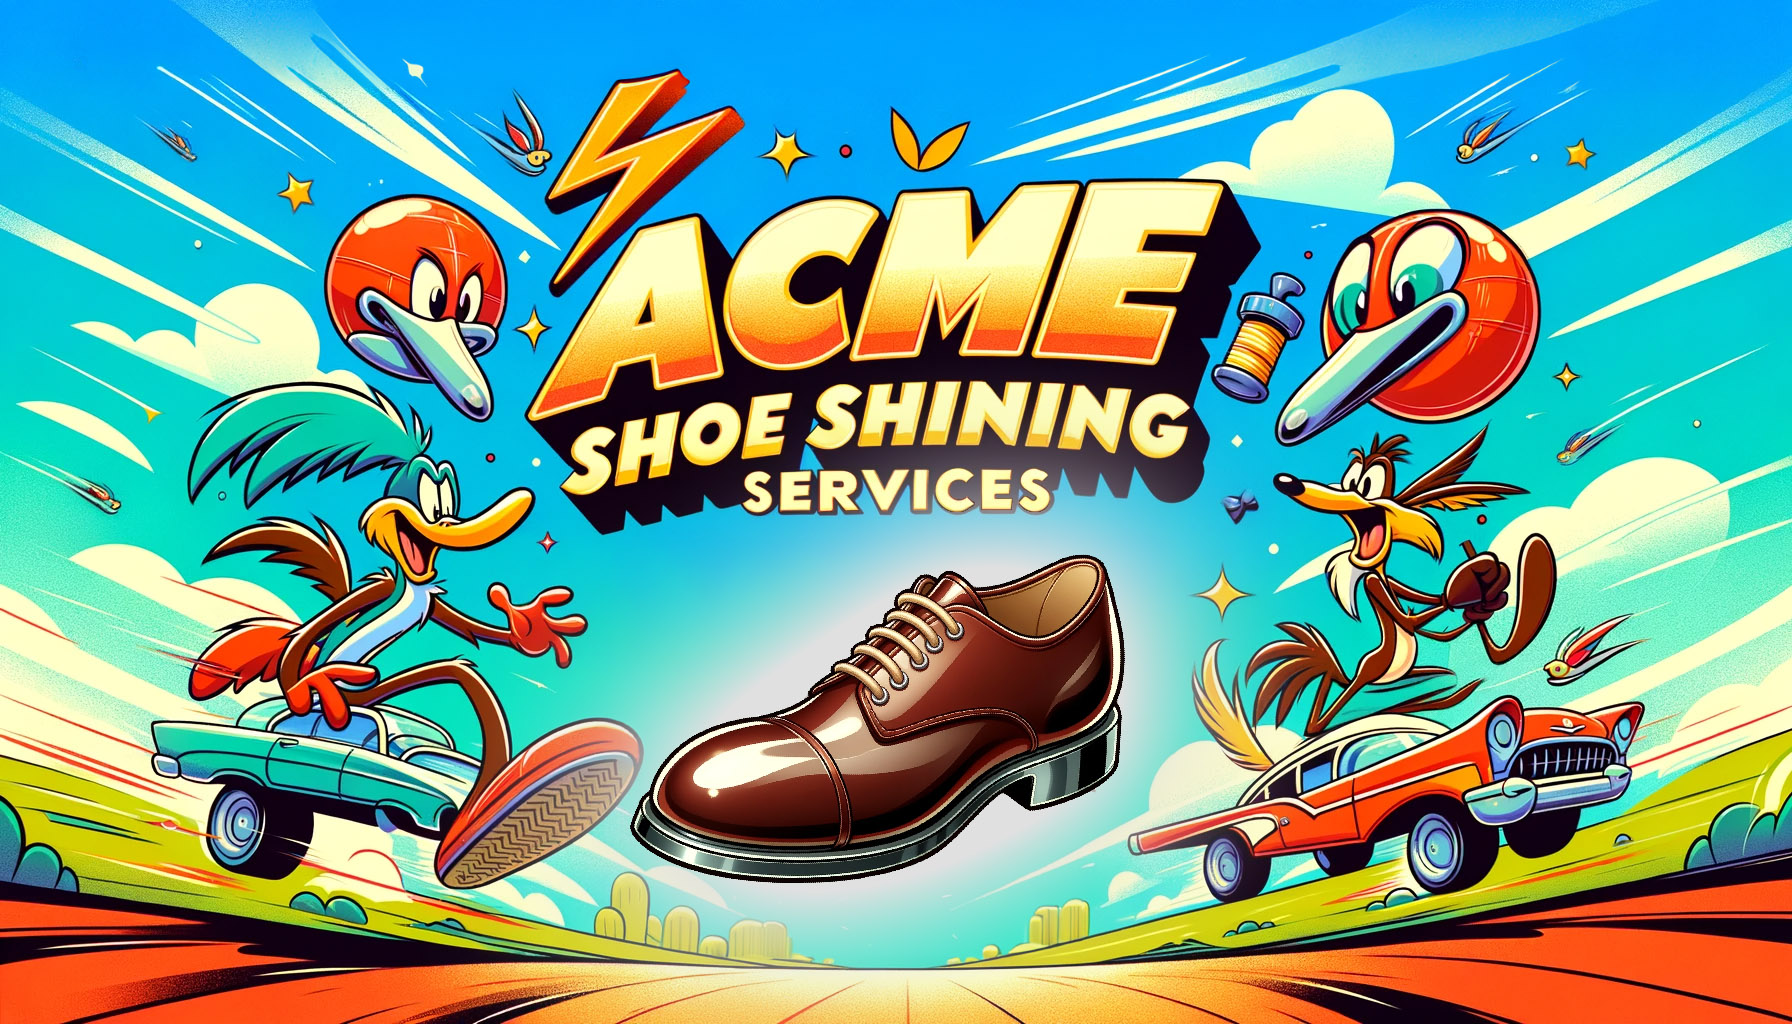 Welcome to Acme Shoe Shining Services